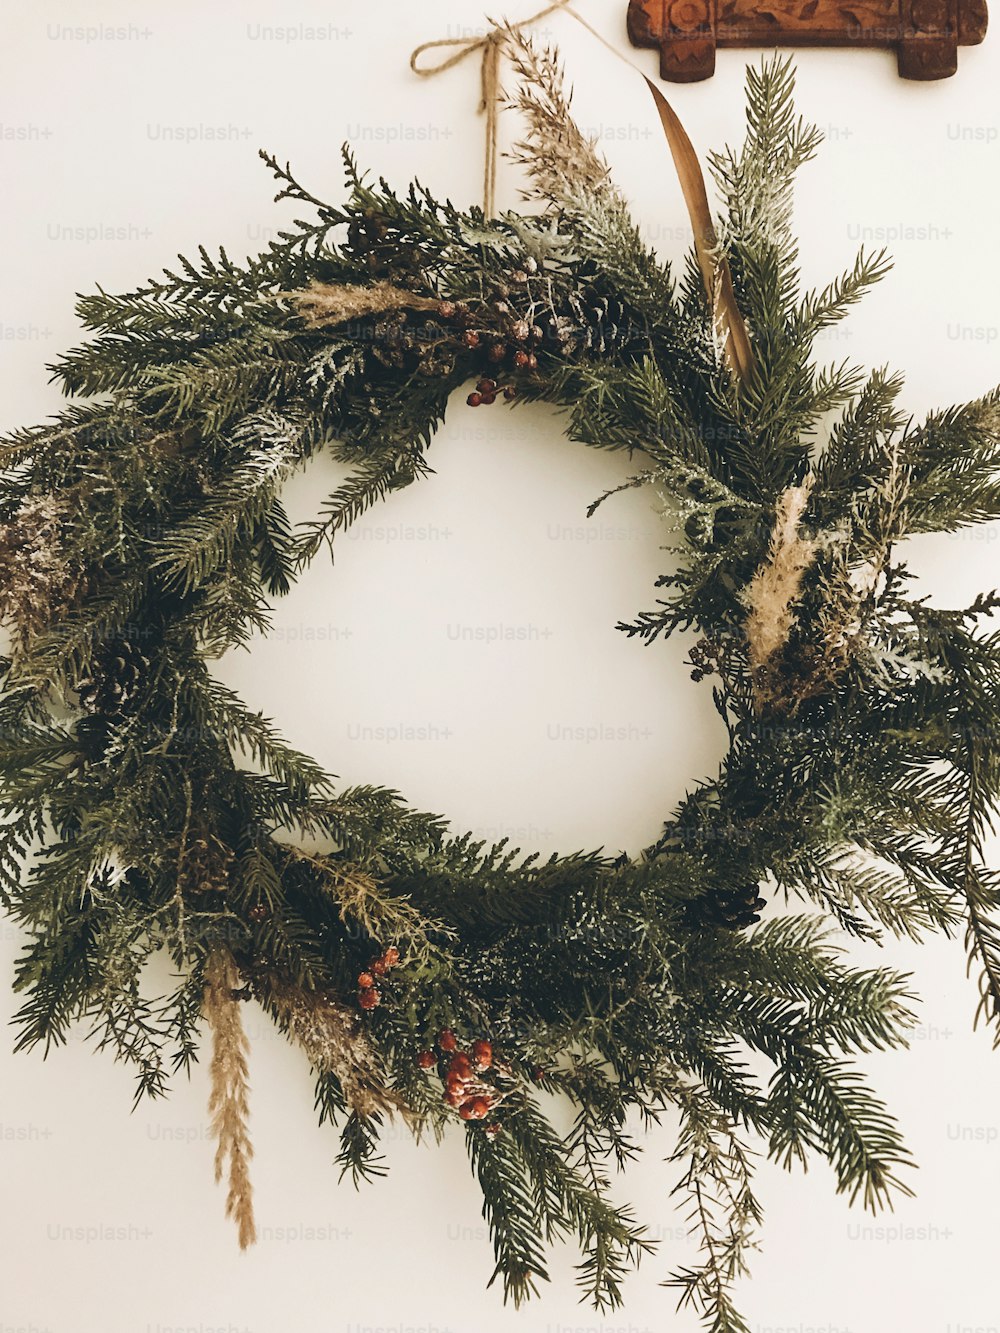 Stylish rustic wreath on white wall. Rural modern wreath hanging white wall background in room. Happy Holidays. Festive decoration. Phone photo